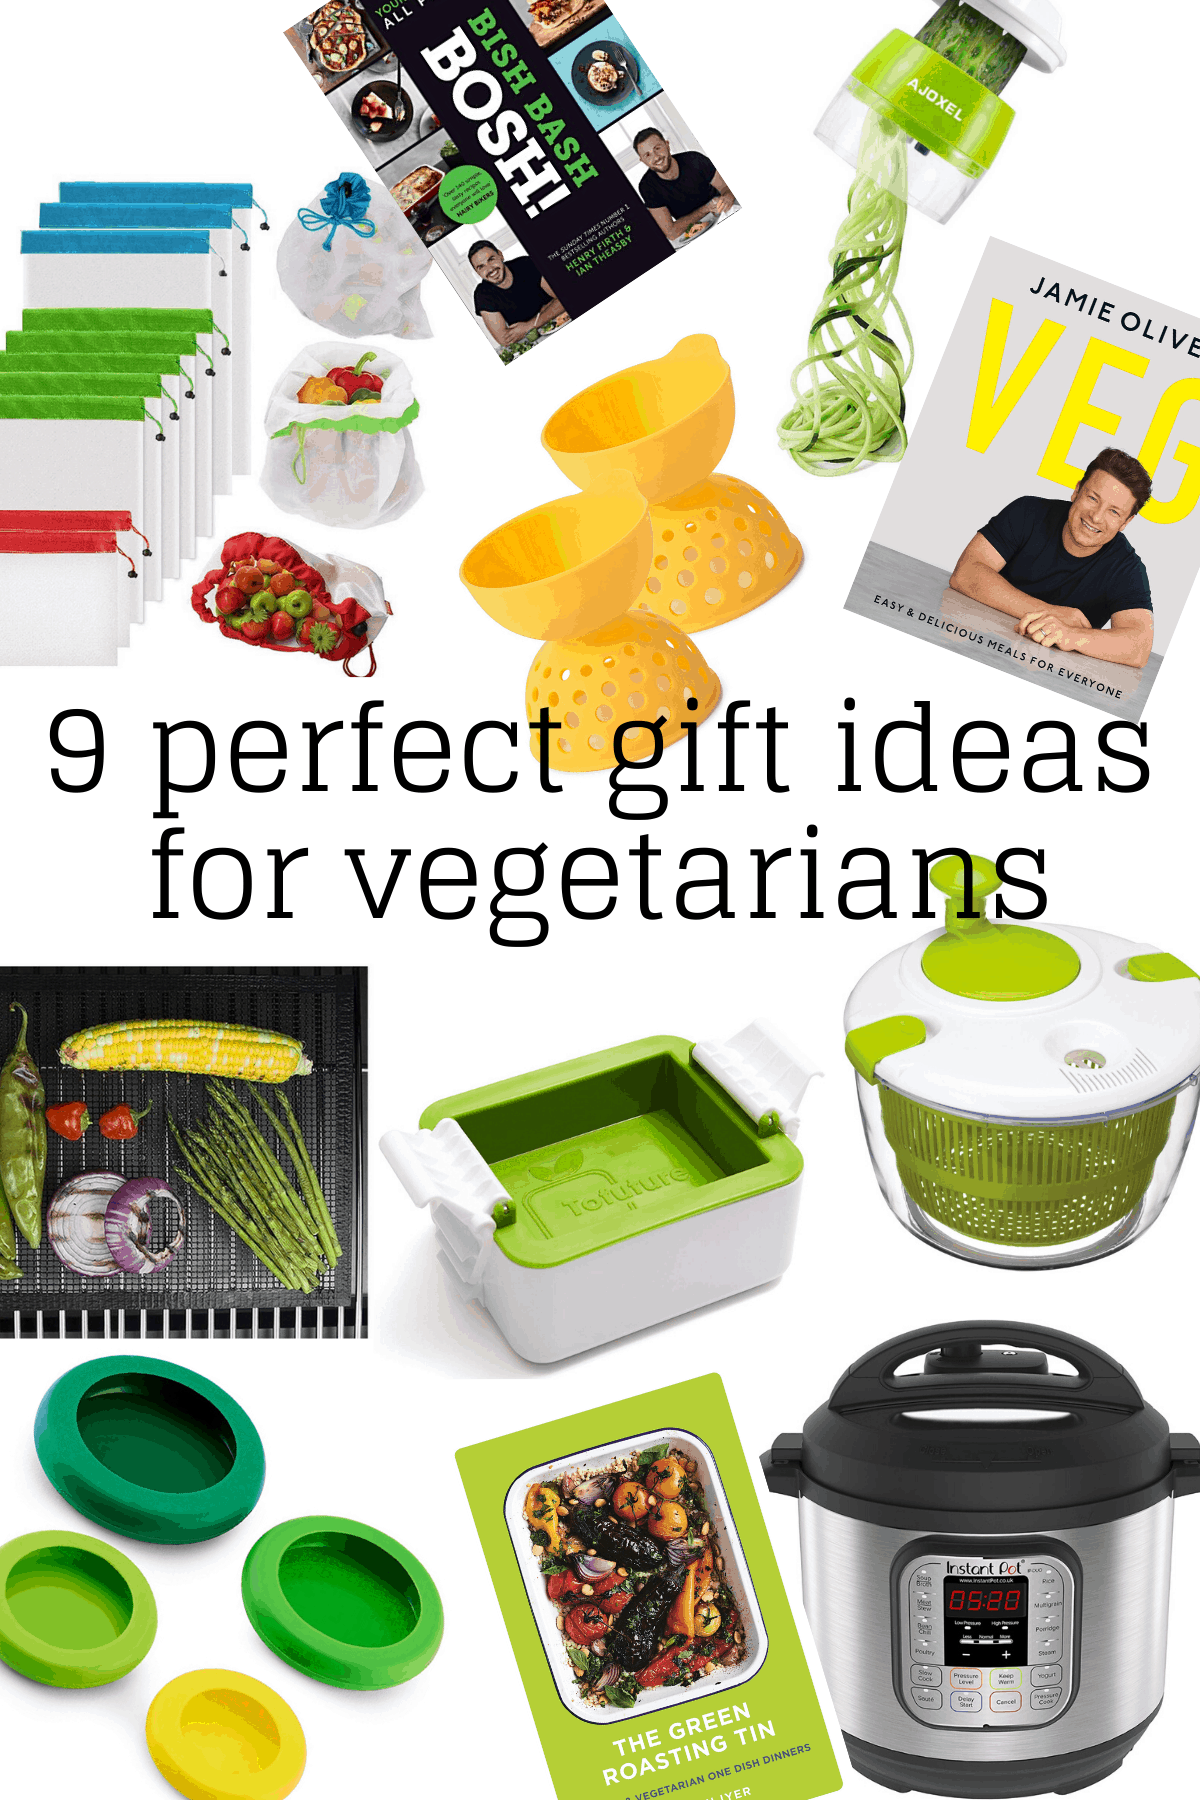 A collage showing 9 perfect gift ideas for vegetarians.